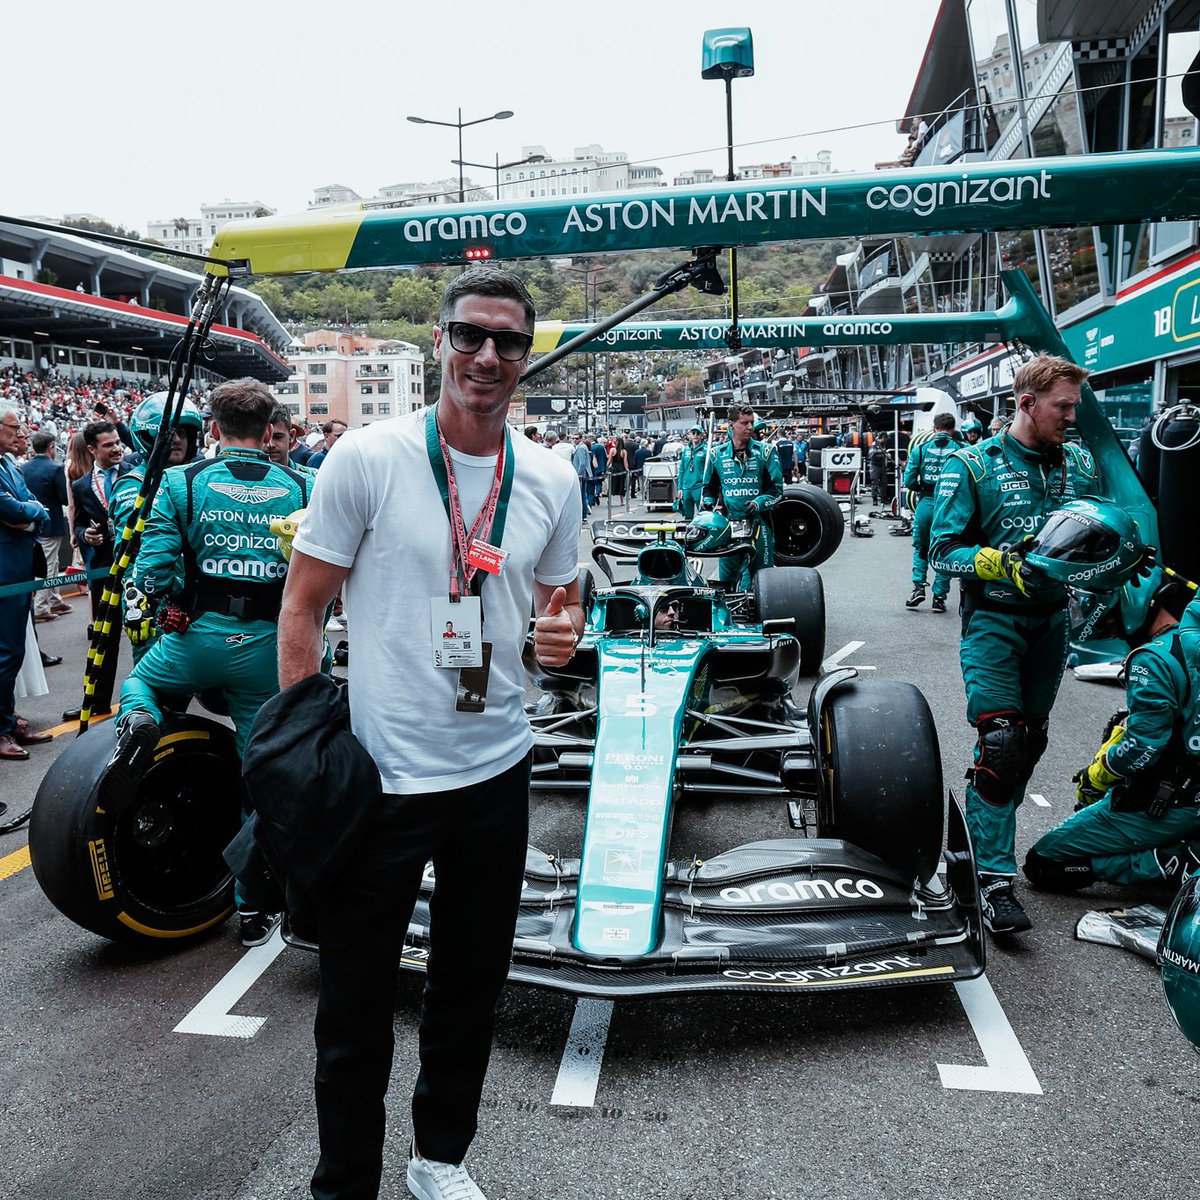 We’re delighted to have @FCBayern striker, Robert Lewandowski, join the team today. Great to have you with us, @lewy_official. Enjoy the race! #F1 #MonacoGP | @pzpn_pl